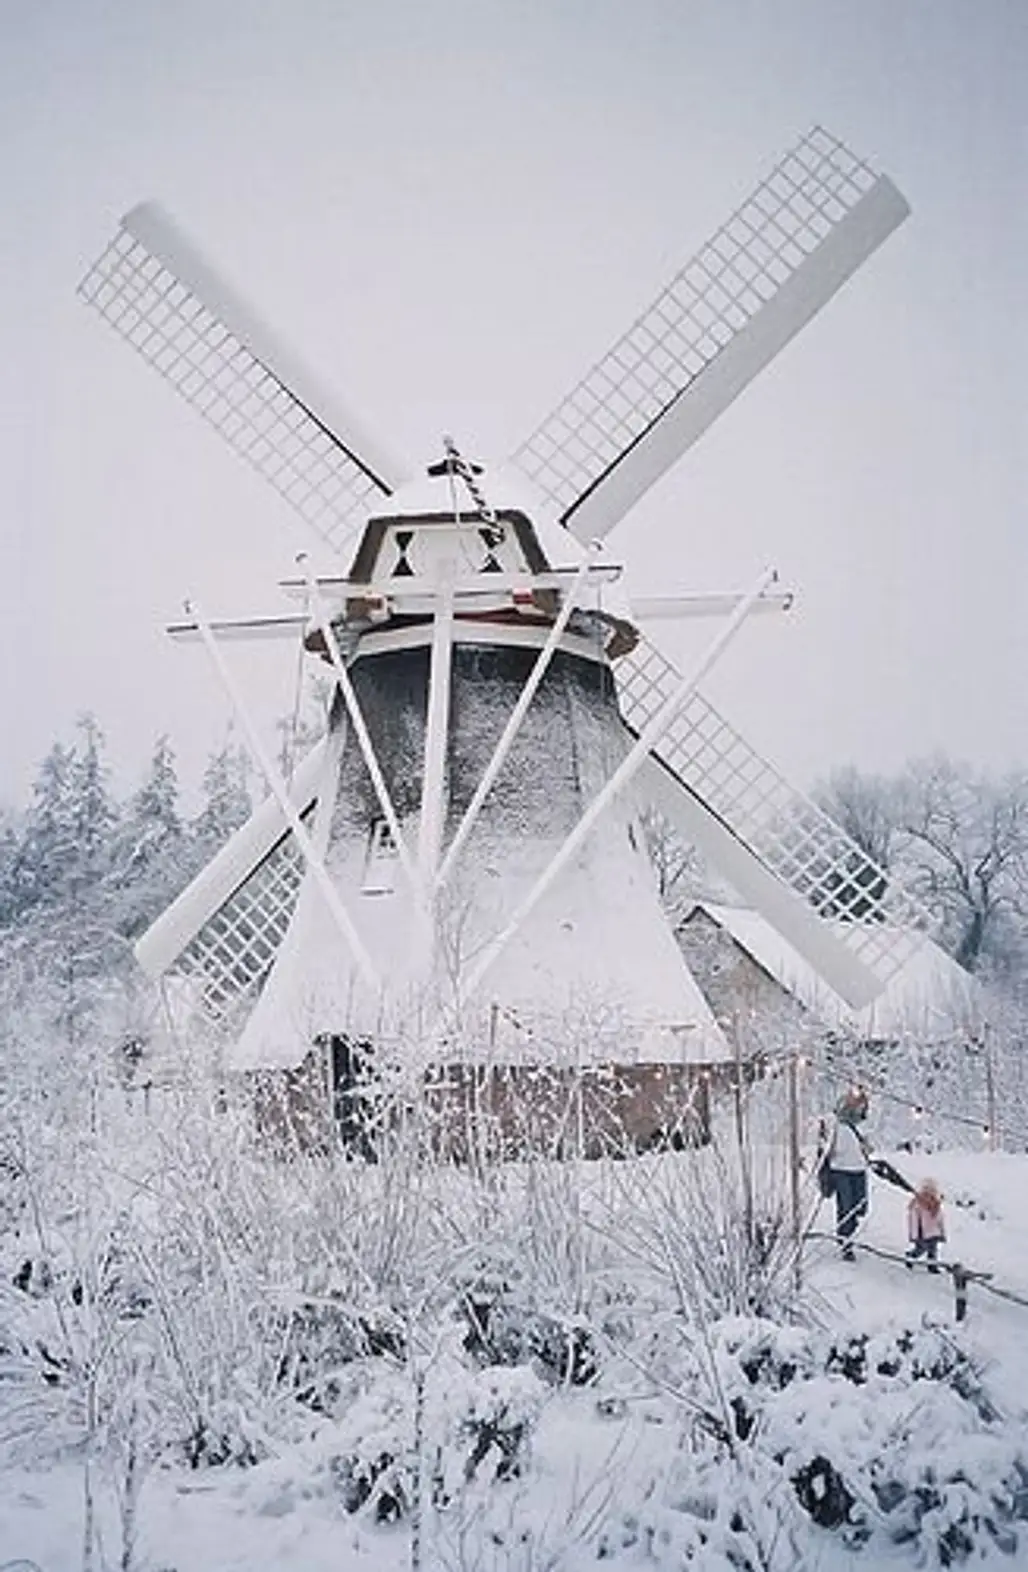 The Open Air Museum, the Netherlands